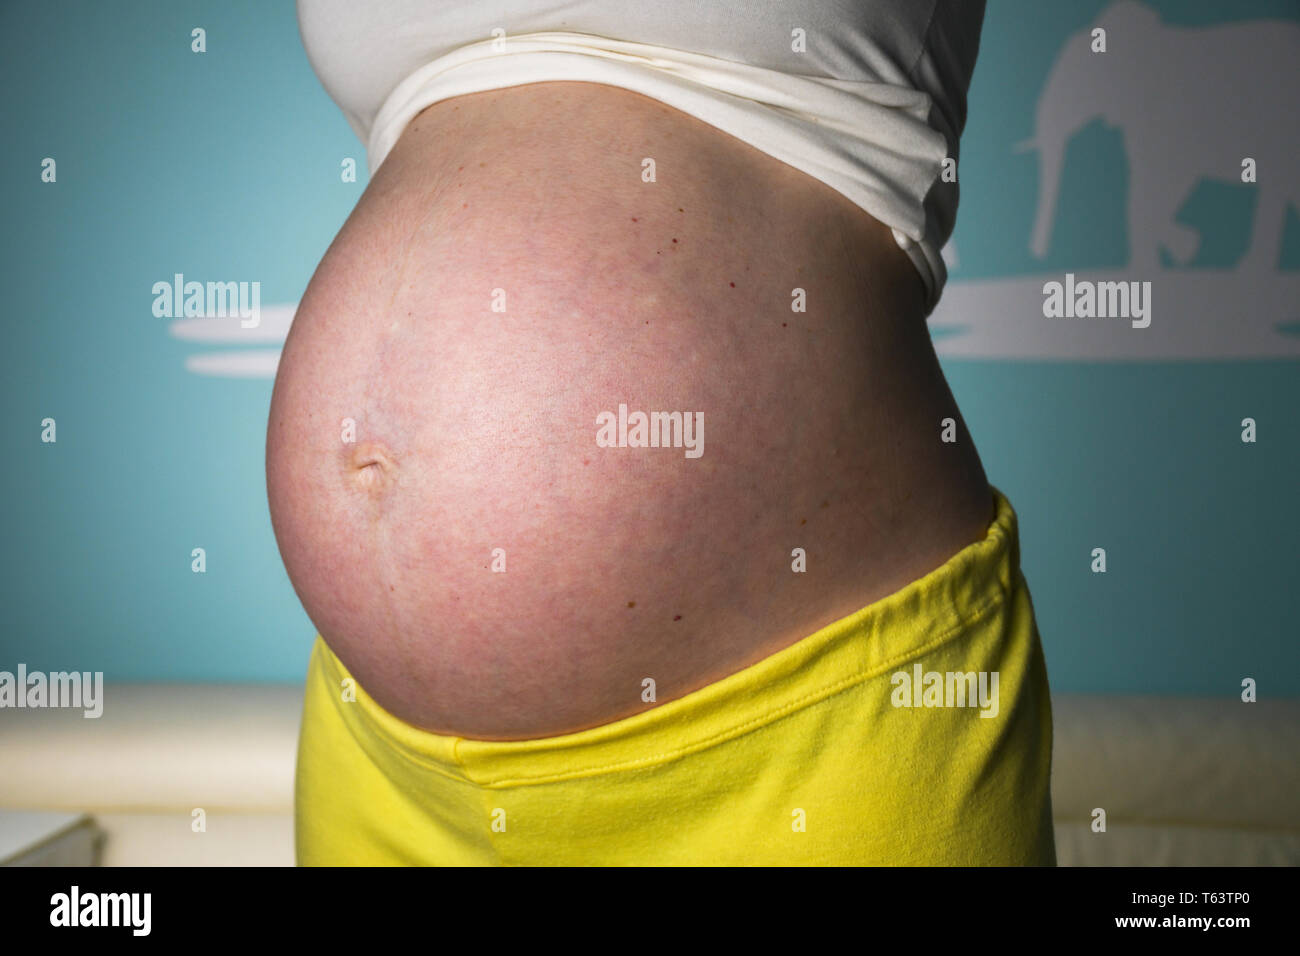 Pregnant woman at home showing her beautiful, nicely rounded tummy Stock Photo